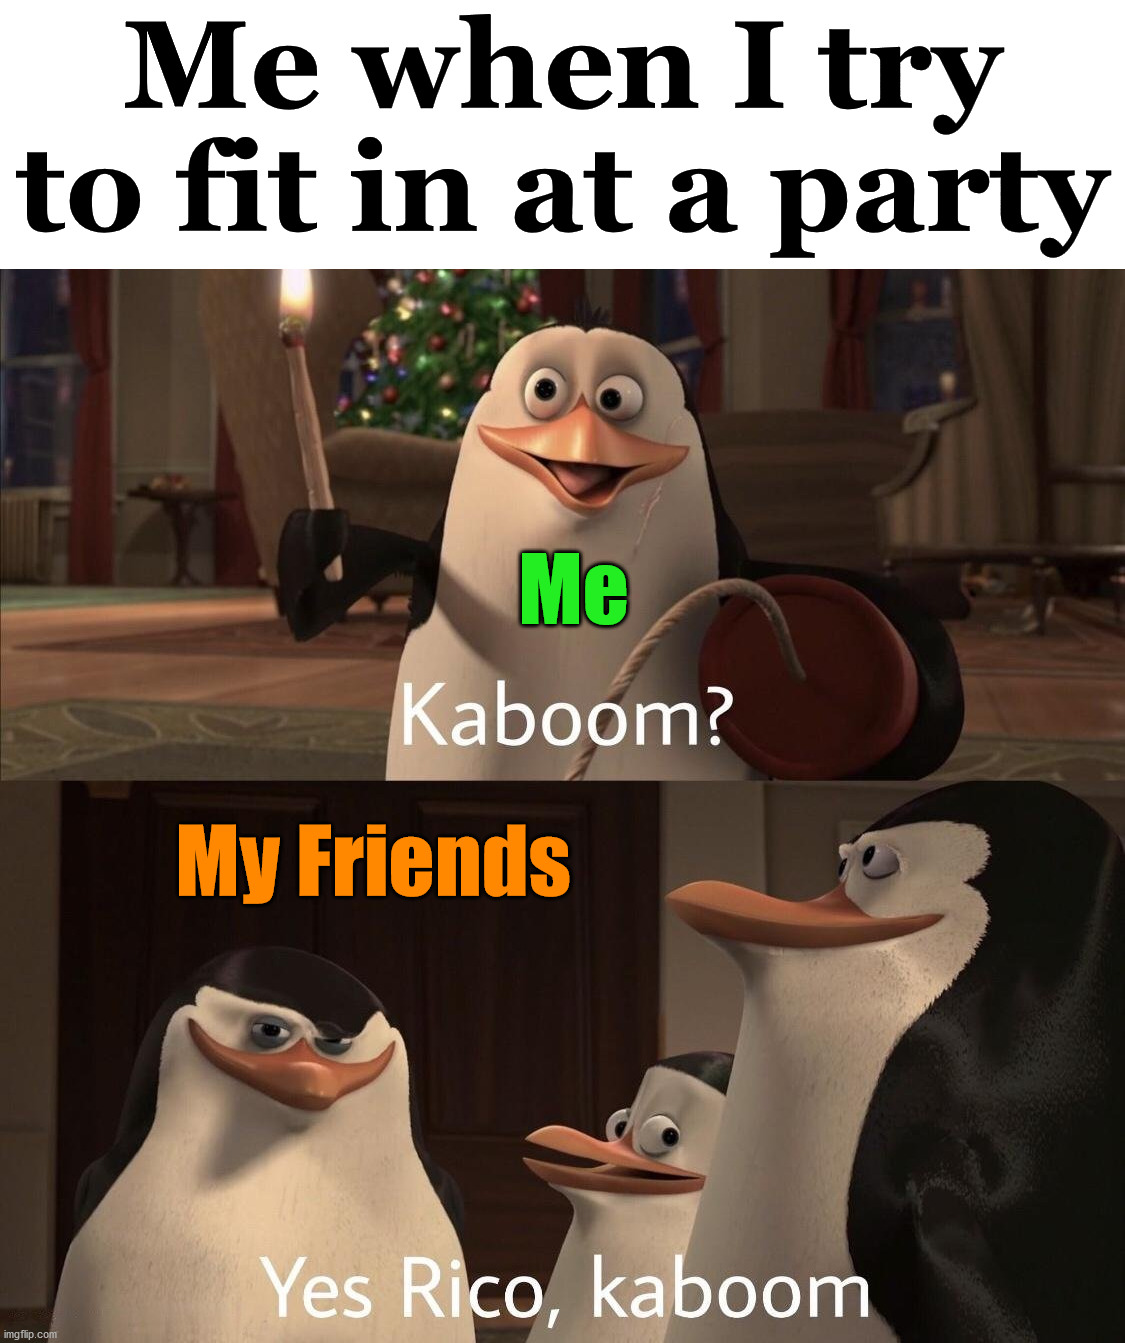 They like it when I go off at a party. |  Me when I try to fit in at a party; Me; My Friends | image tagged in kaboom yes rico kaboom,party time,friends | made w/ Imgflip meme maker